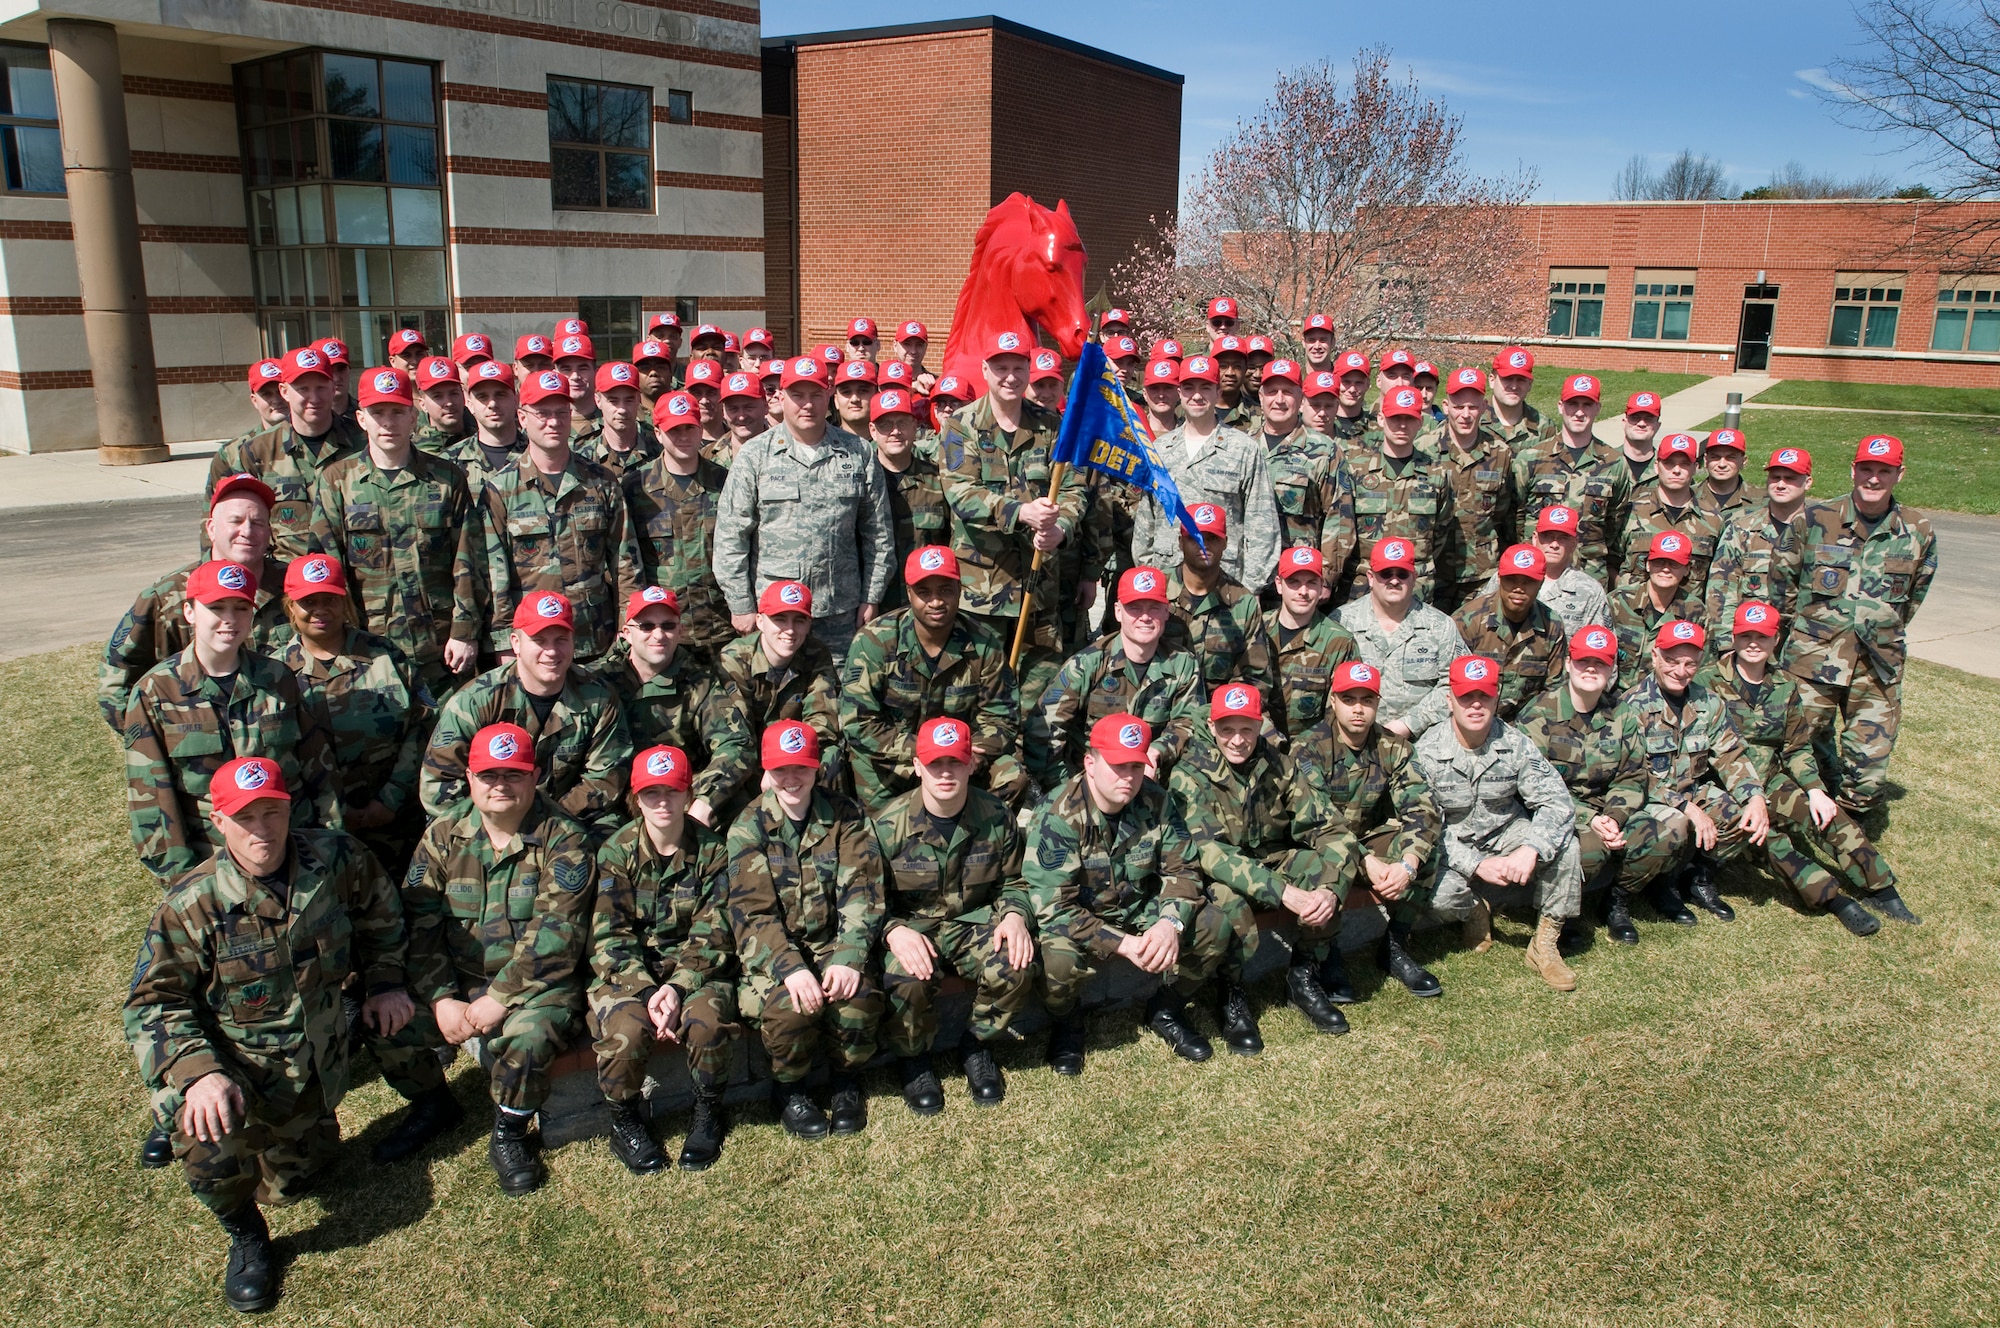 On April 5, more than 100 guardsmen sported the red caps for the first time and cheerfully yelled “to the HORSE” during the  201st RED HORSE Squadron, Det. 1 activation ceremony at Willow Grove Air Reserve Station, Pa.  RED HORSE stands for Rapid Engineer Deployable Heavy Operational Repair Squadron Engineer. These units are self sufficient, 404-person mobile squadrons that provide major force bed-down, heavy damage repair, and heavy engineering operations in remote, high-threat environments worldwide.